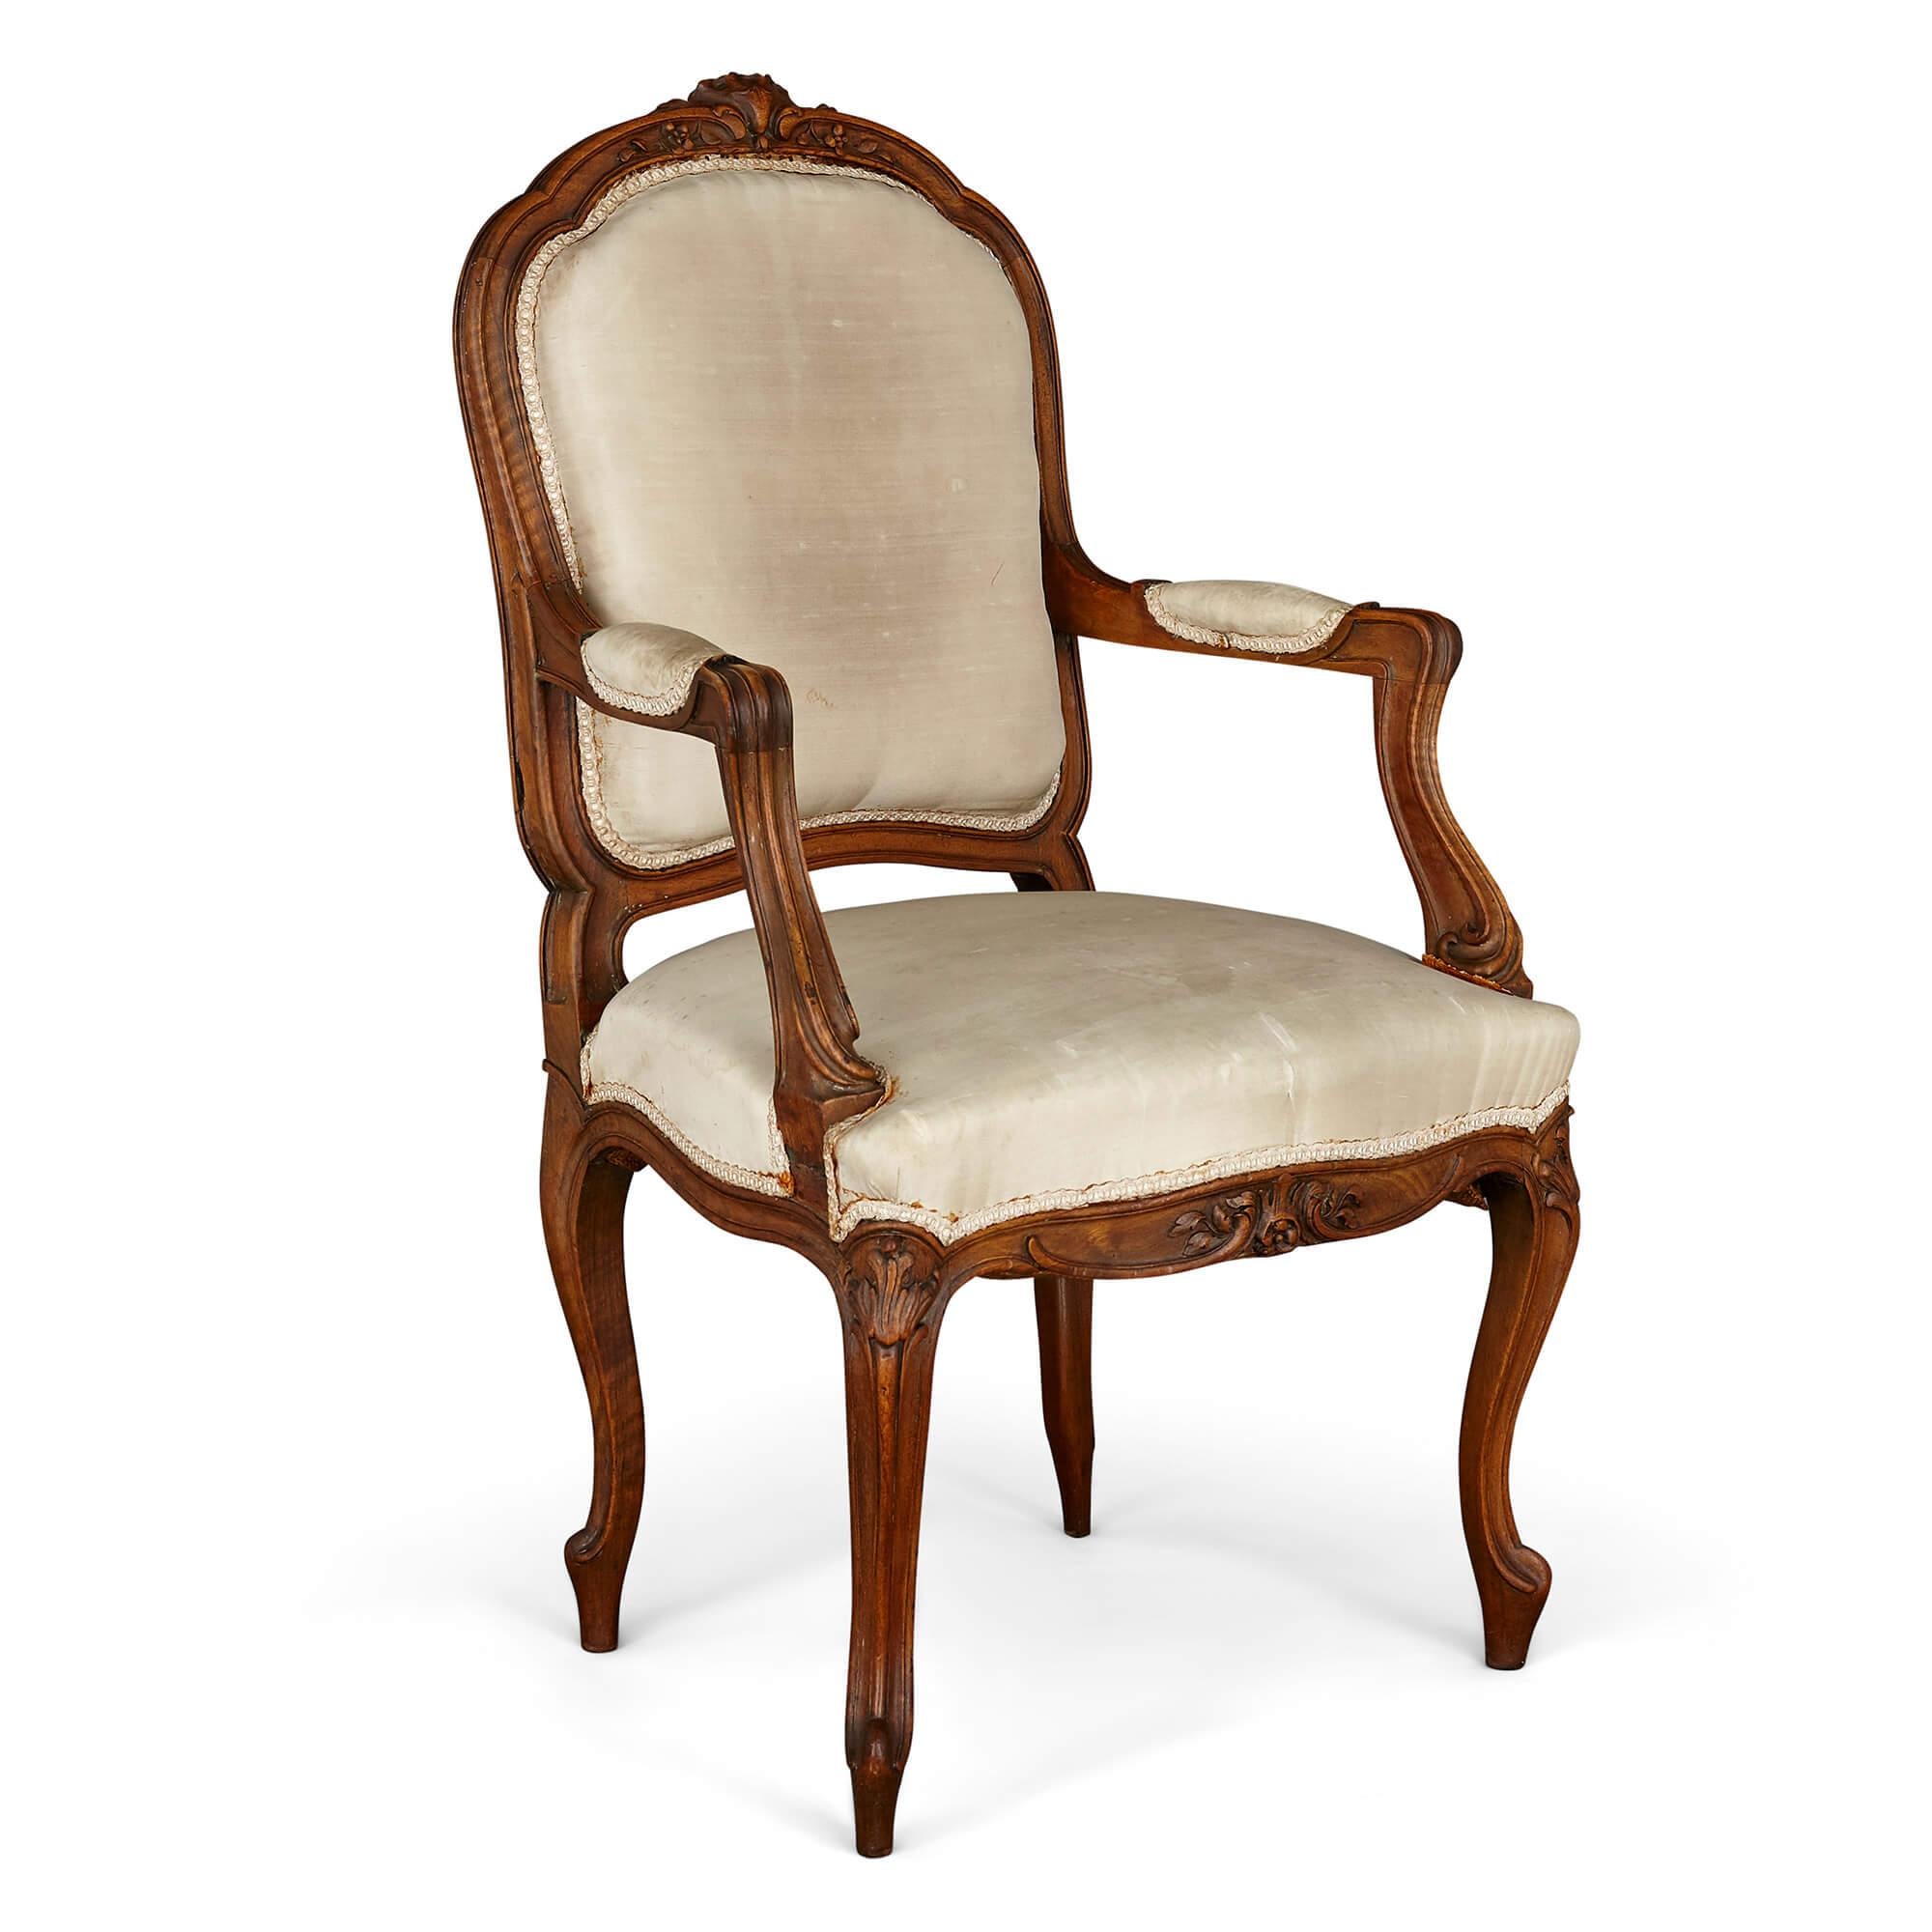 Set of Régence style mahogany armchairs and side chairs
French, early 20th century
Measures: Armchairs: Height 103cm, width 56cm, depth 50cm
Side chairs: Height 87cm, width 43cm, depth 40cm

The chairs in this set are crafted in the Régence